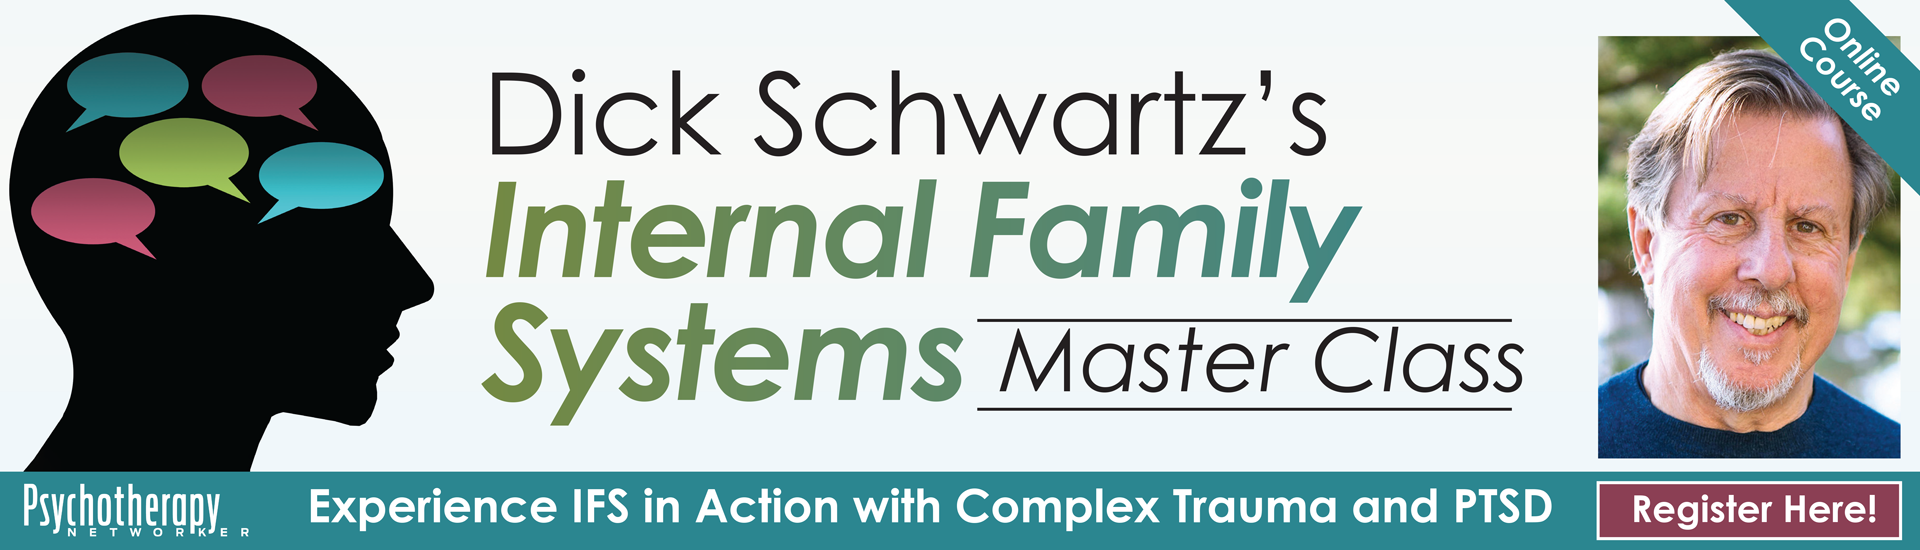 Dick Schwartz’s Internal Family Systems Master Class: Experience IFS in Action with Complex Trauma and PTSD